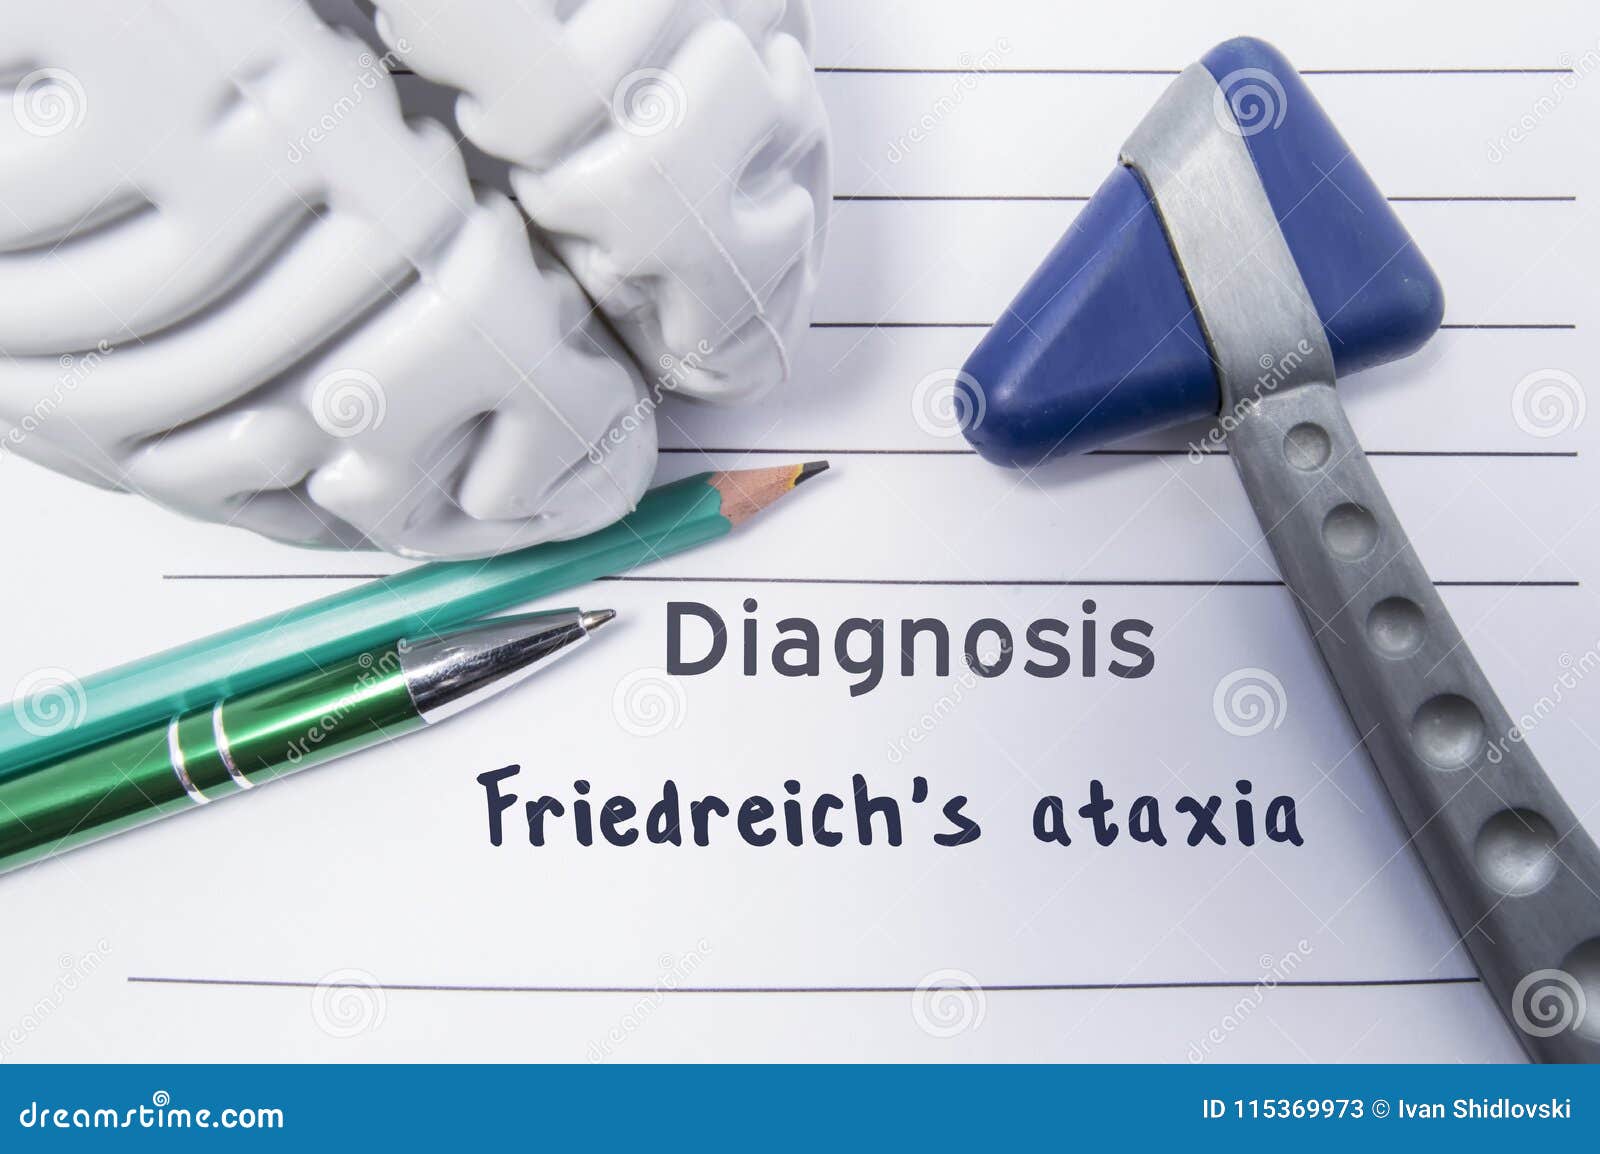 neurological diagnosis of friedreichs ataxia. neurological hammer,  of brain, pen and pencil the lying on medical report, lab